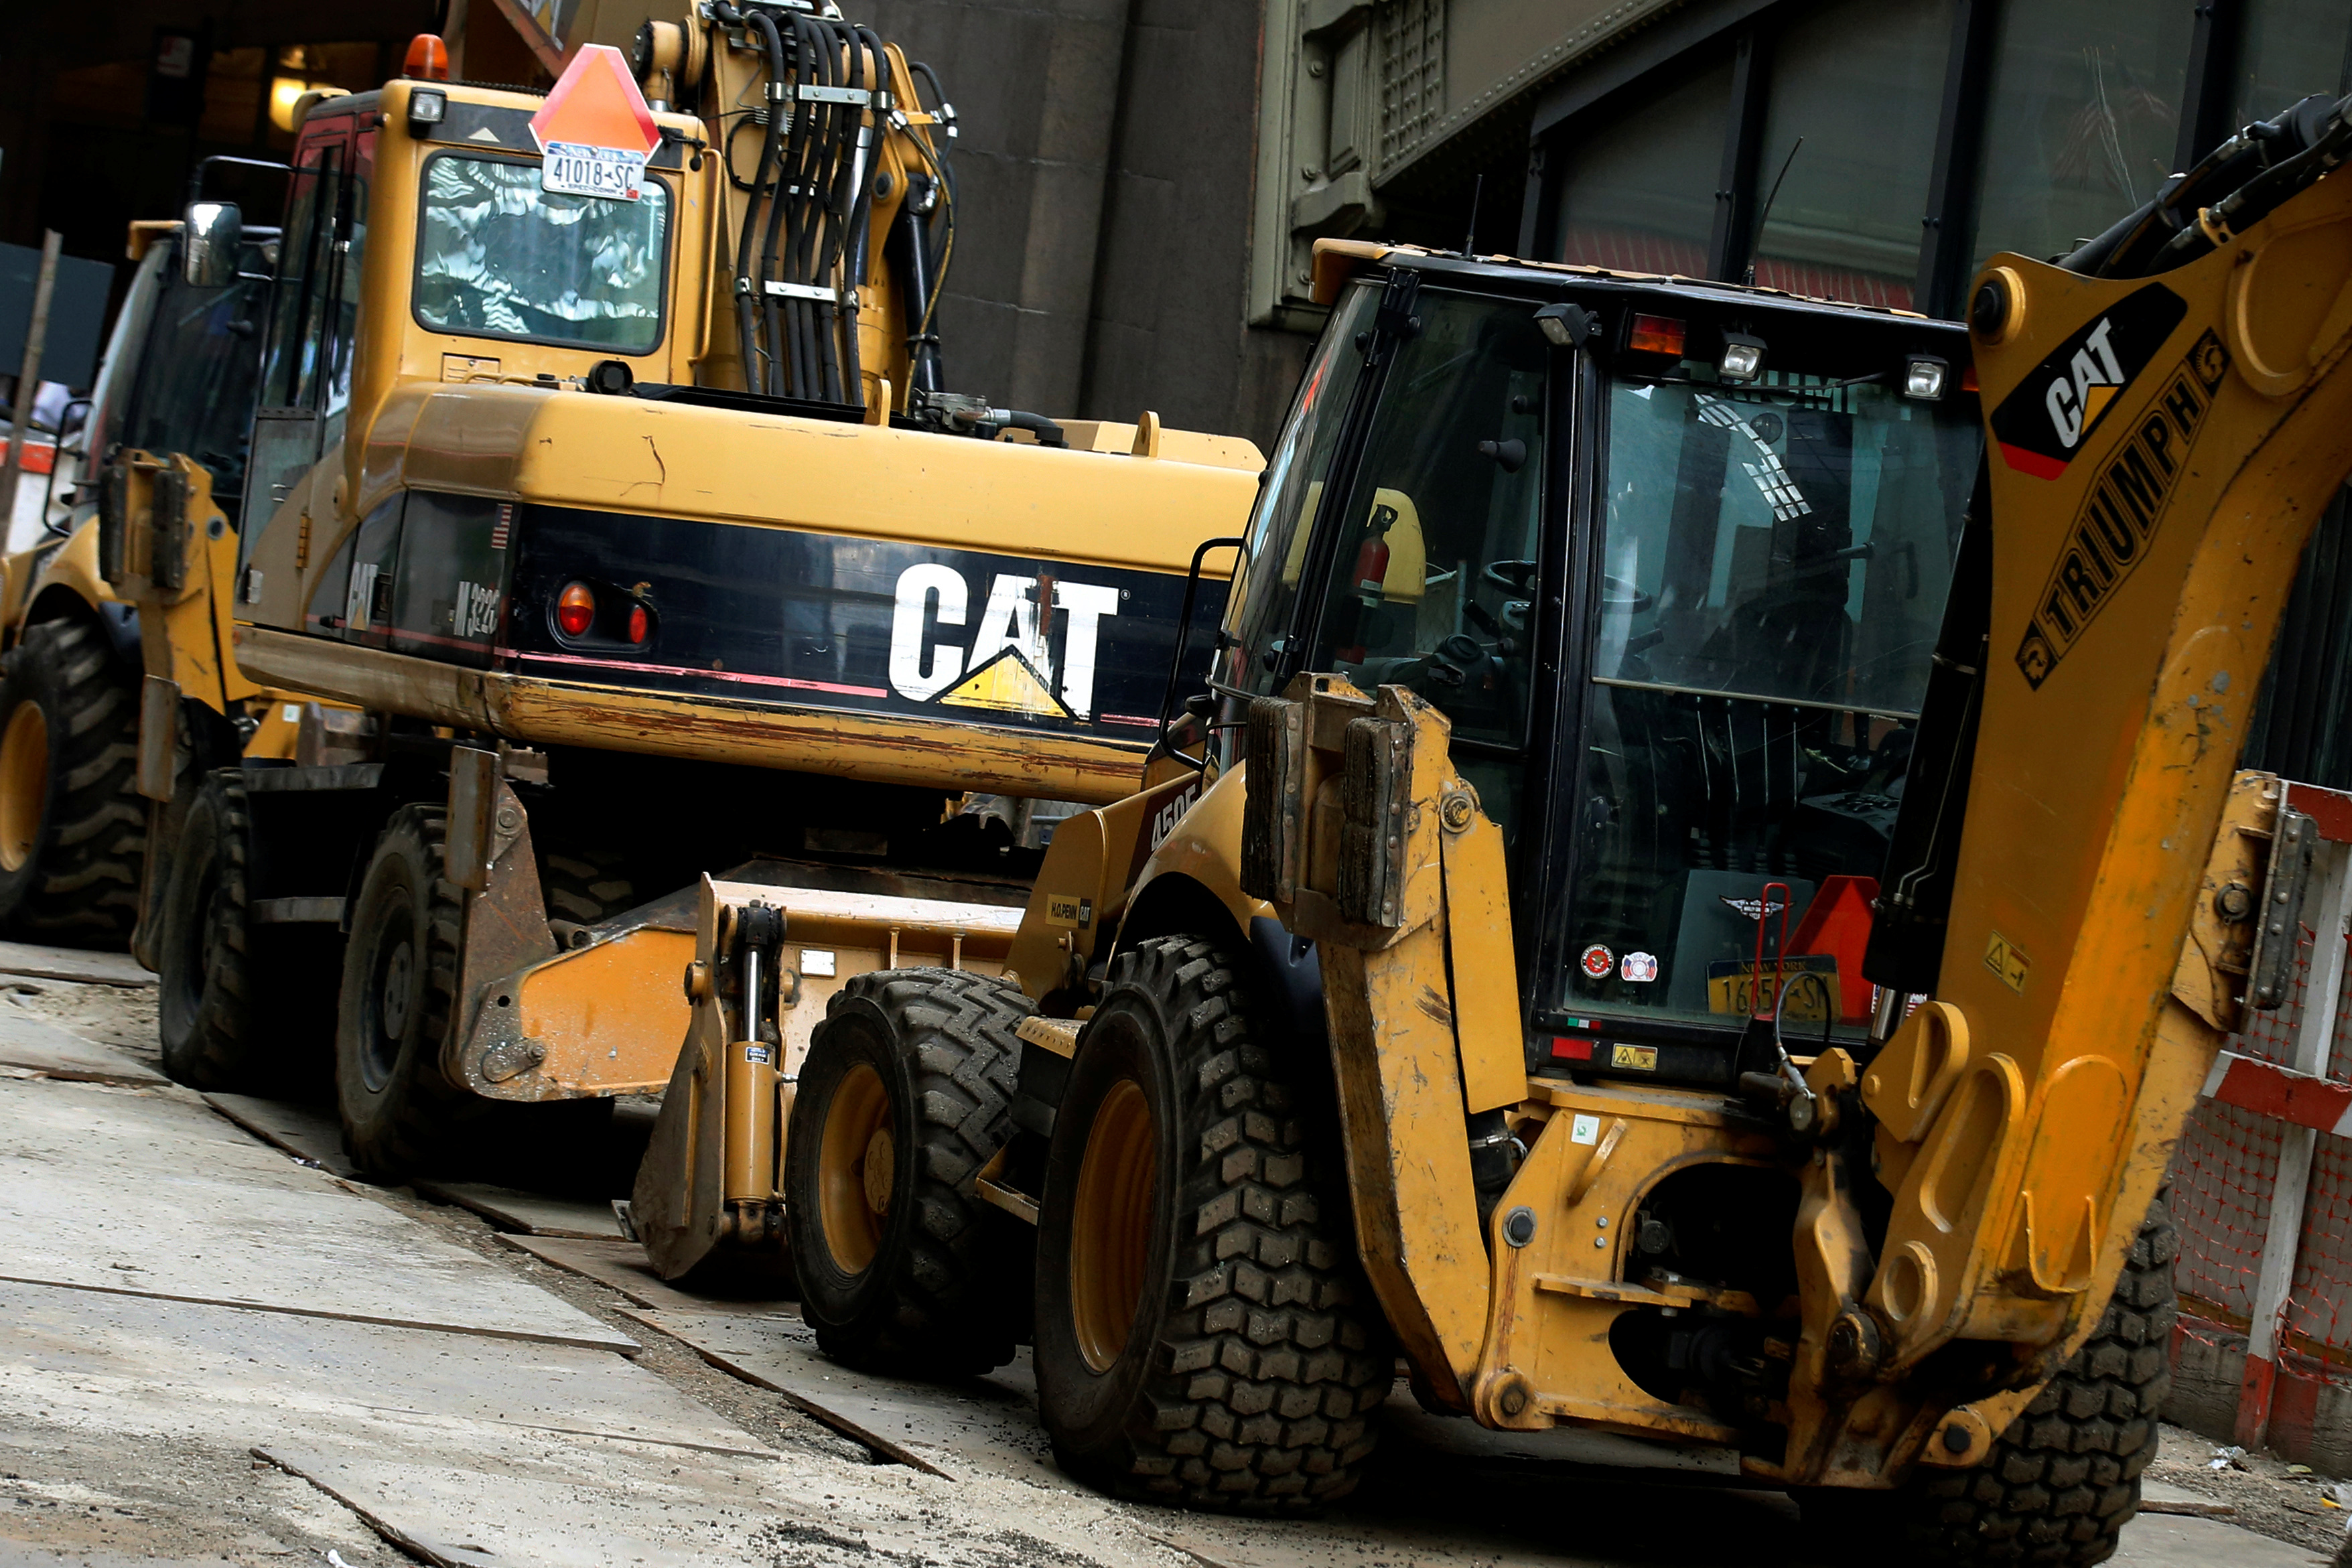 Caterpillar machines are seen at a construction site in New York